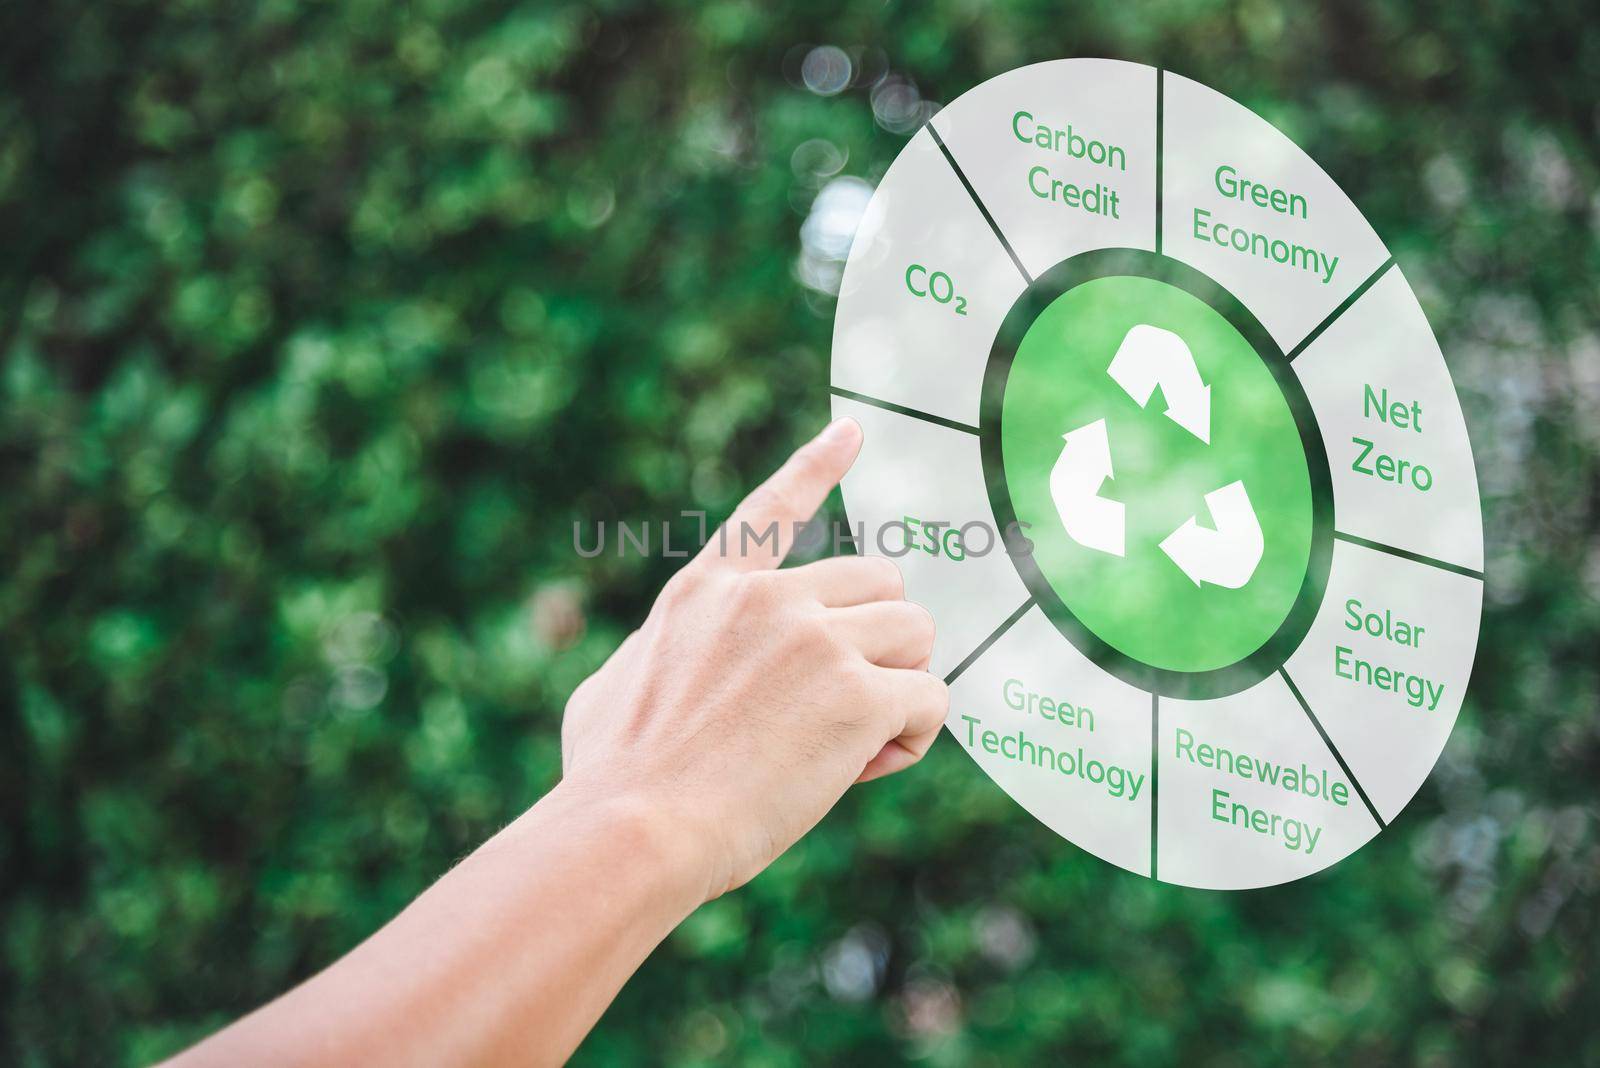 Hand touch icon recycle green energy carbon credit net zero esg co2 digital technology on green background concept. by aoo3771